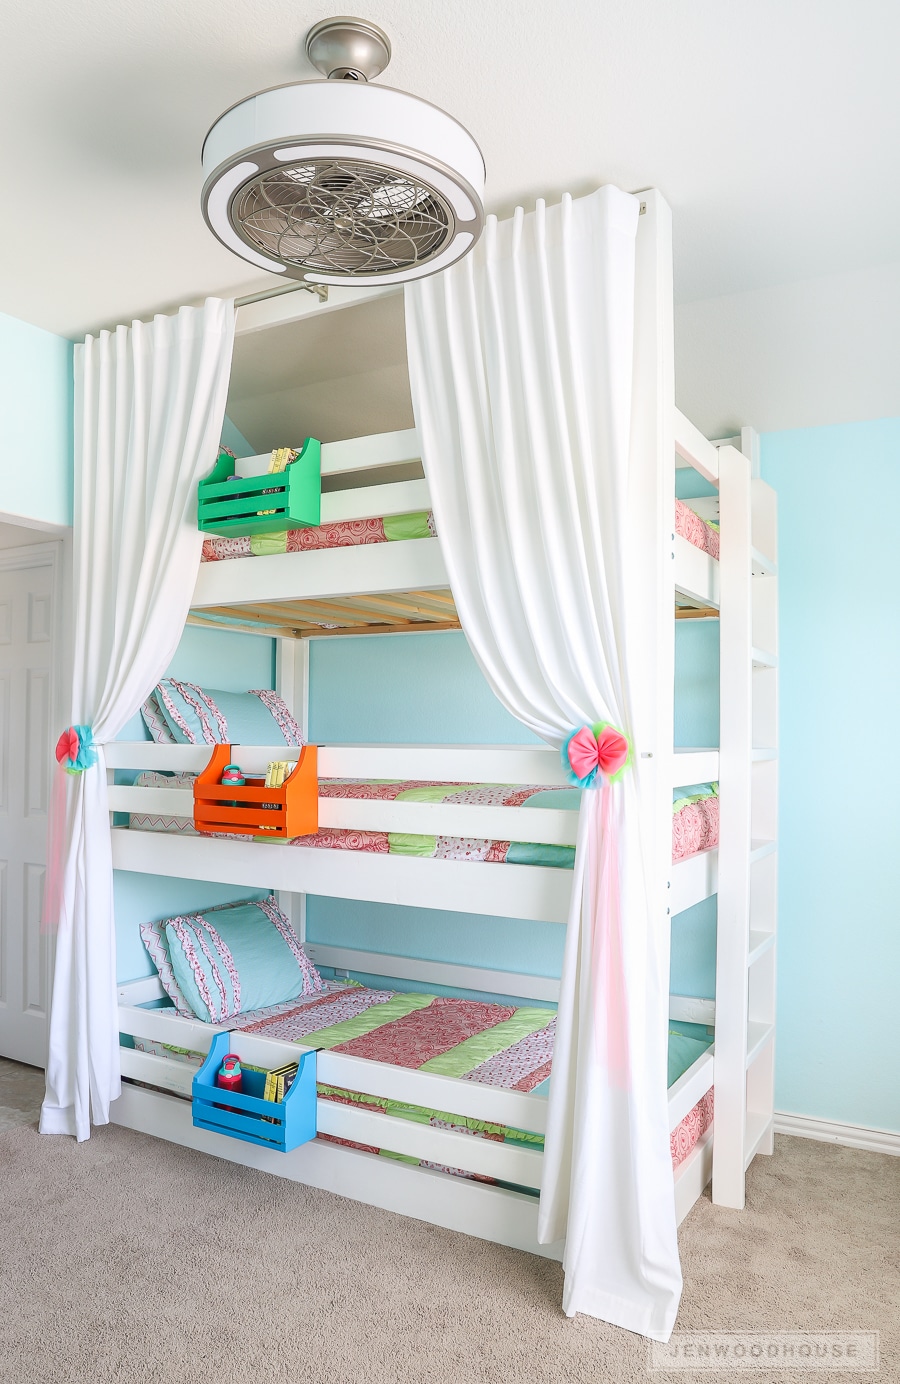 How To Build A Diy Triple Bunk Bed, How Much Does It Cost To Build Custom Bunk Beds